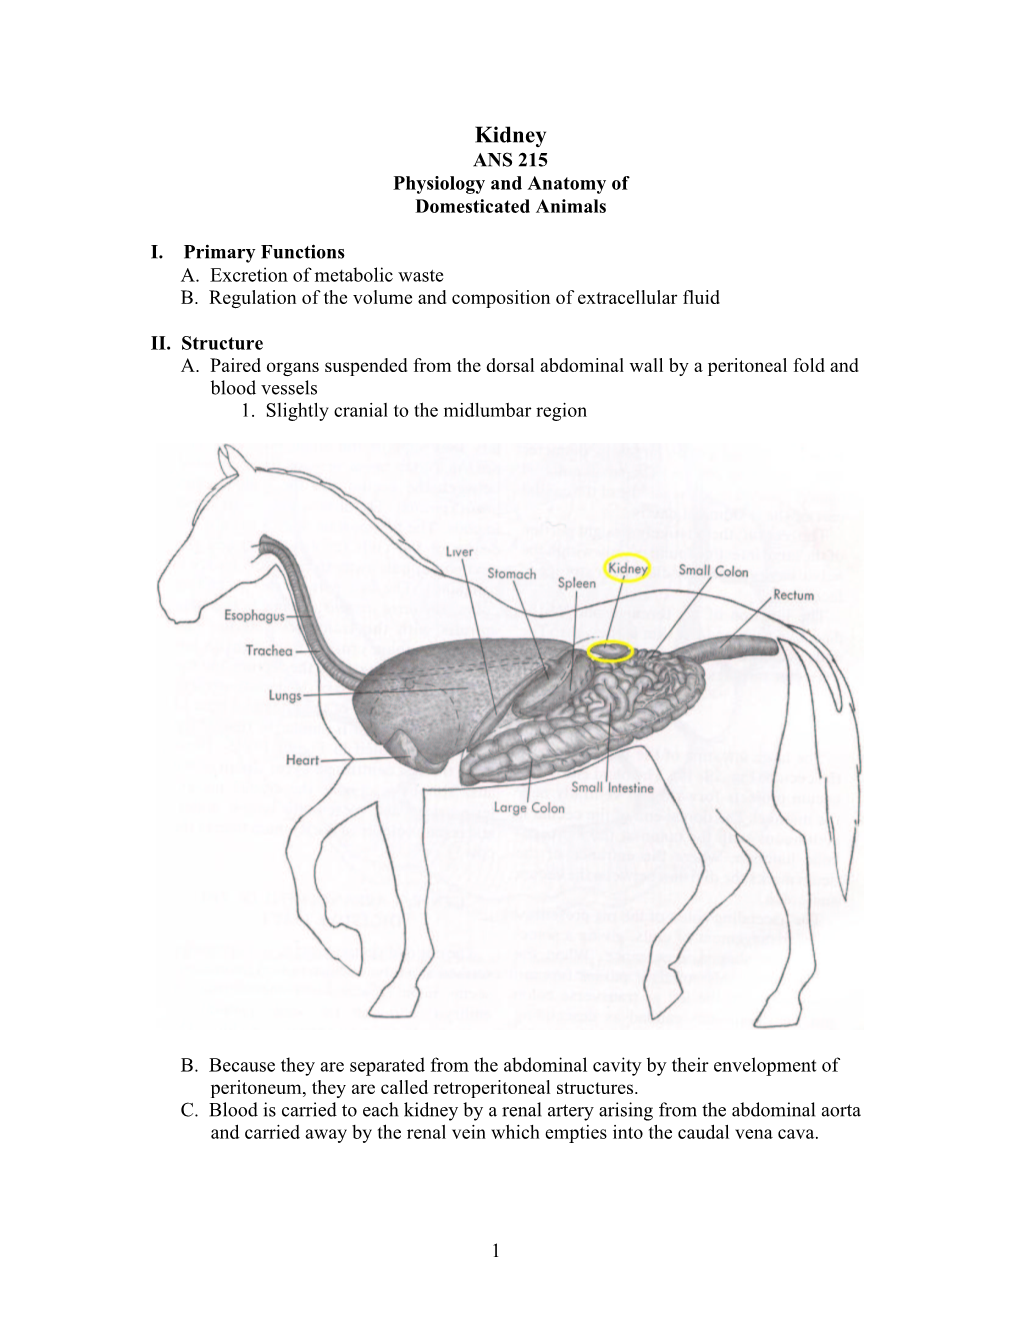 Kidney ANS 215 Physiology and Anatomy of Domesticated Animals